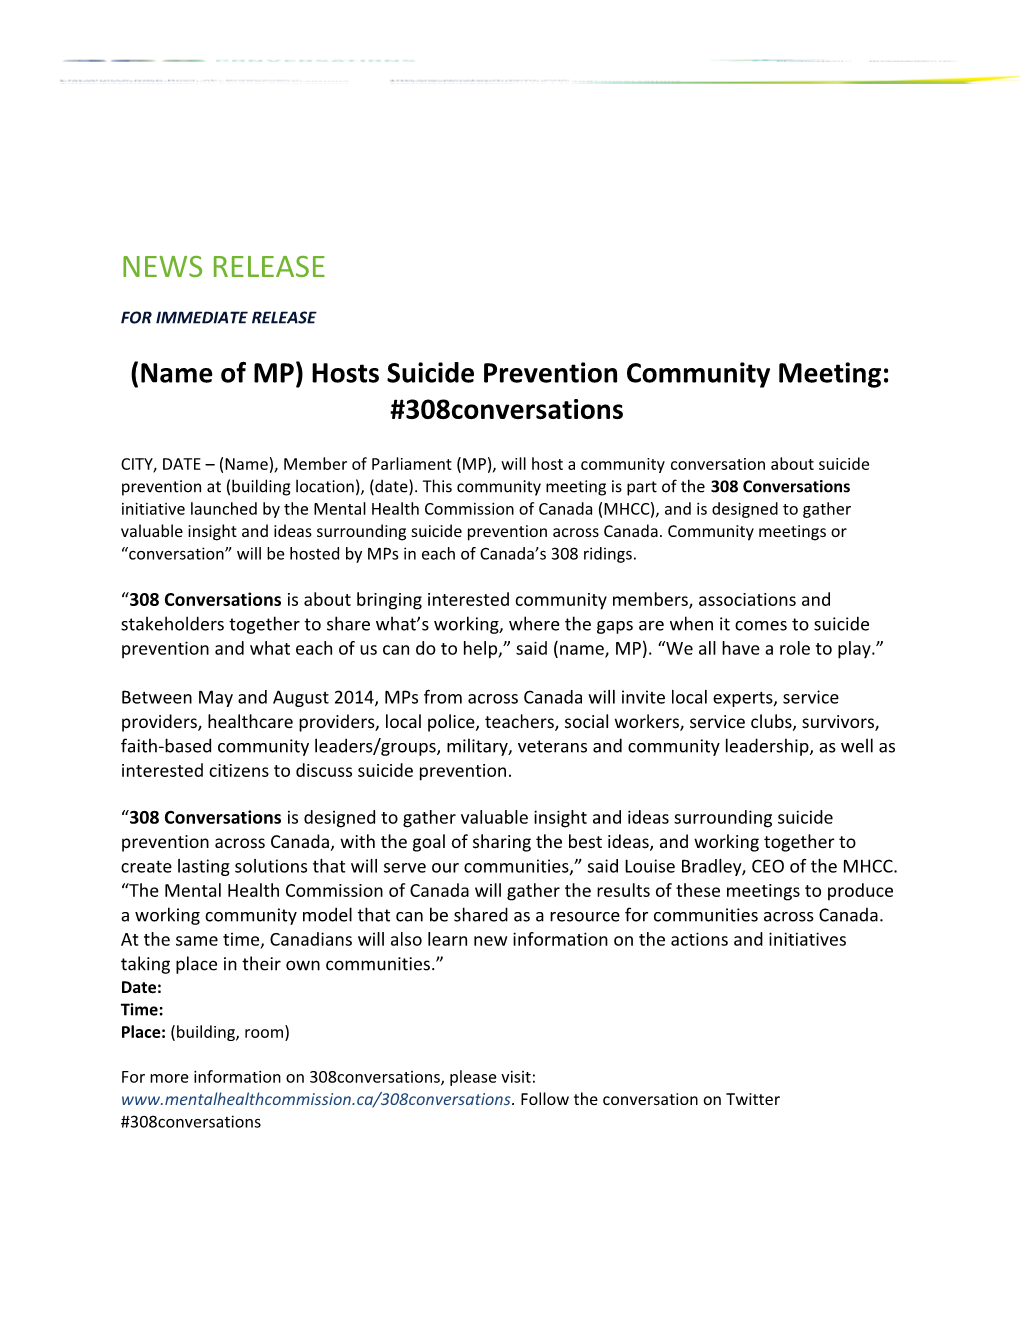 (Name of MP) Hosts Suicide Prevention Community Meeting: #308Conversations